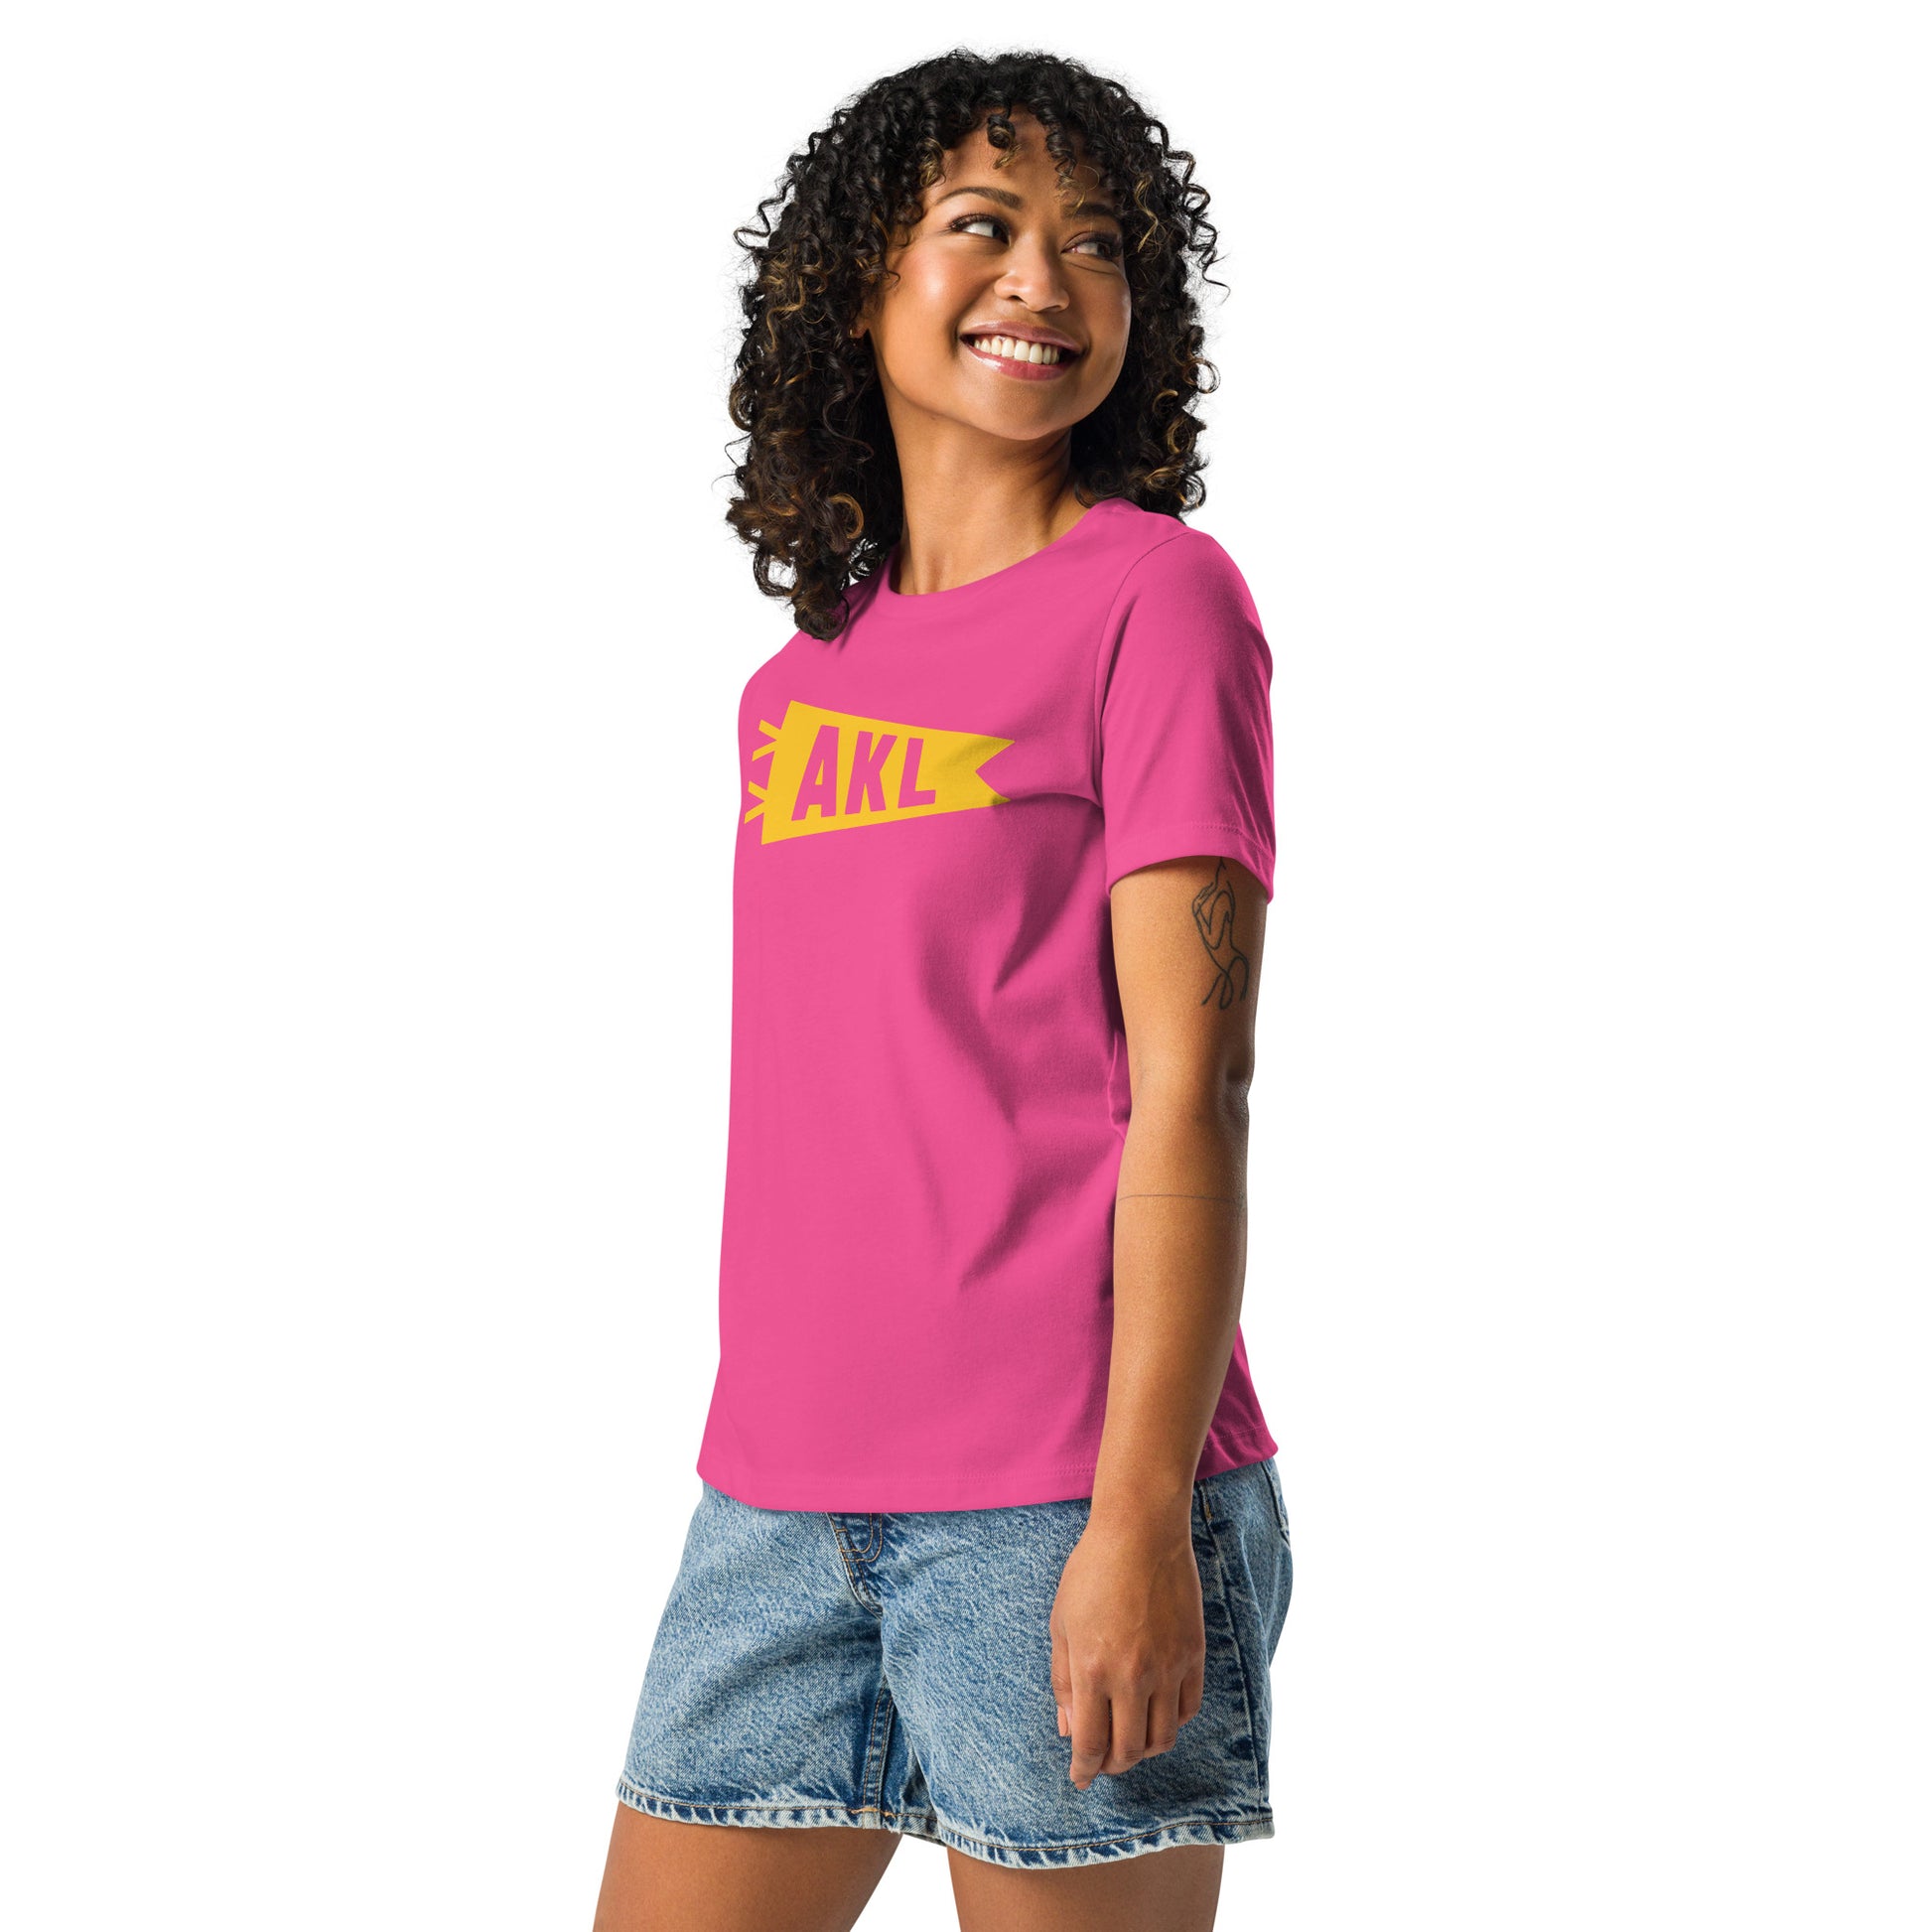 Airport Code Women's Tee - Yellow Graphic • AKL Auckland • YHM Designs - Image 06